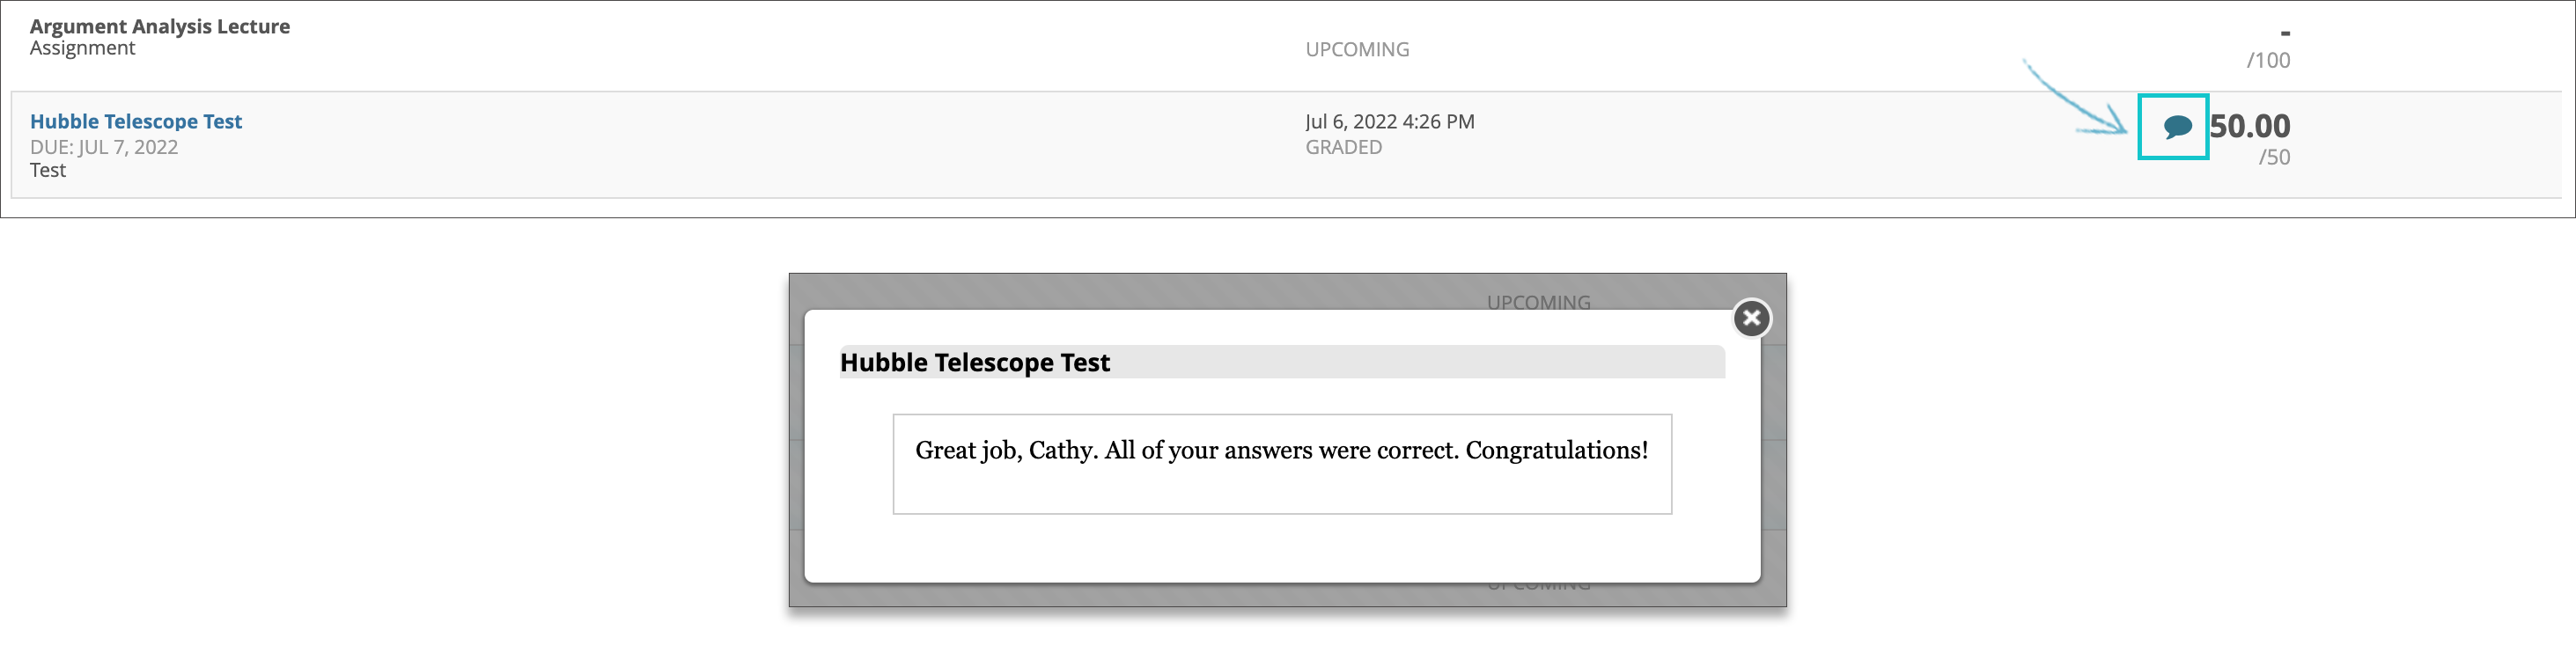 Students can now see the feedback provided by the instructor. A bubble icon is now visible for the test.